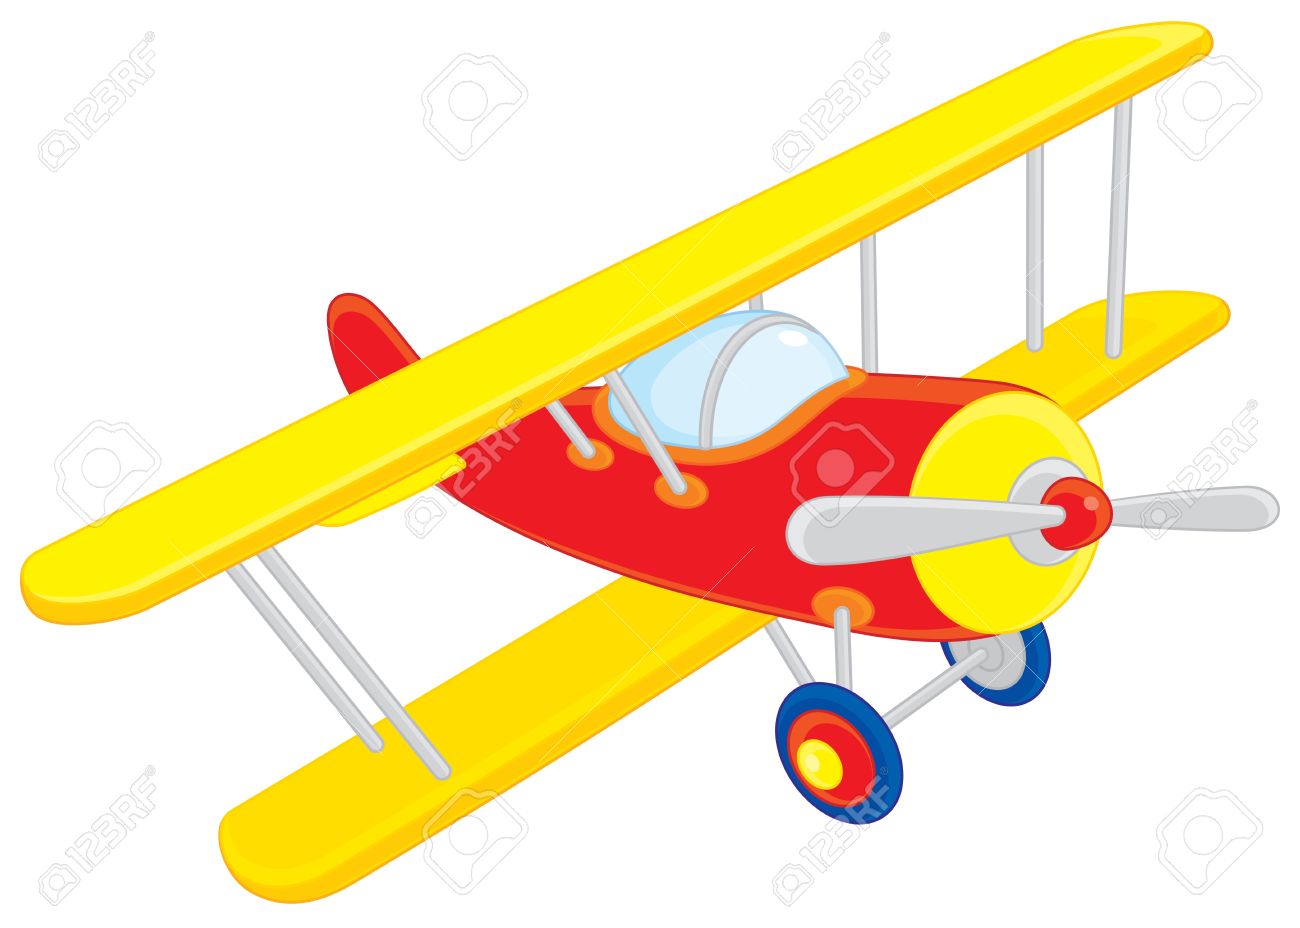 airplane toy clipart - photo #38